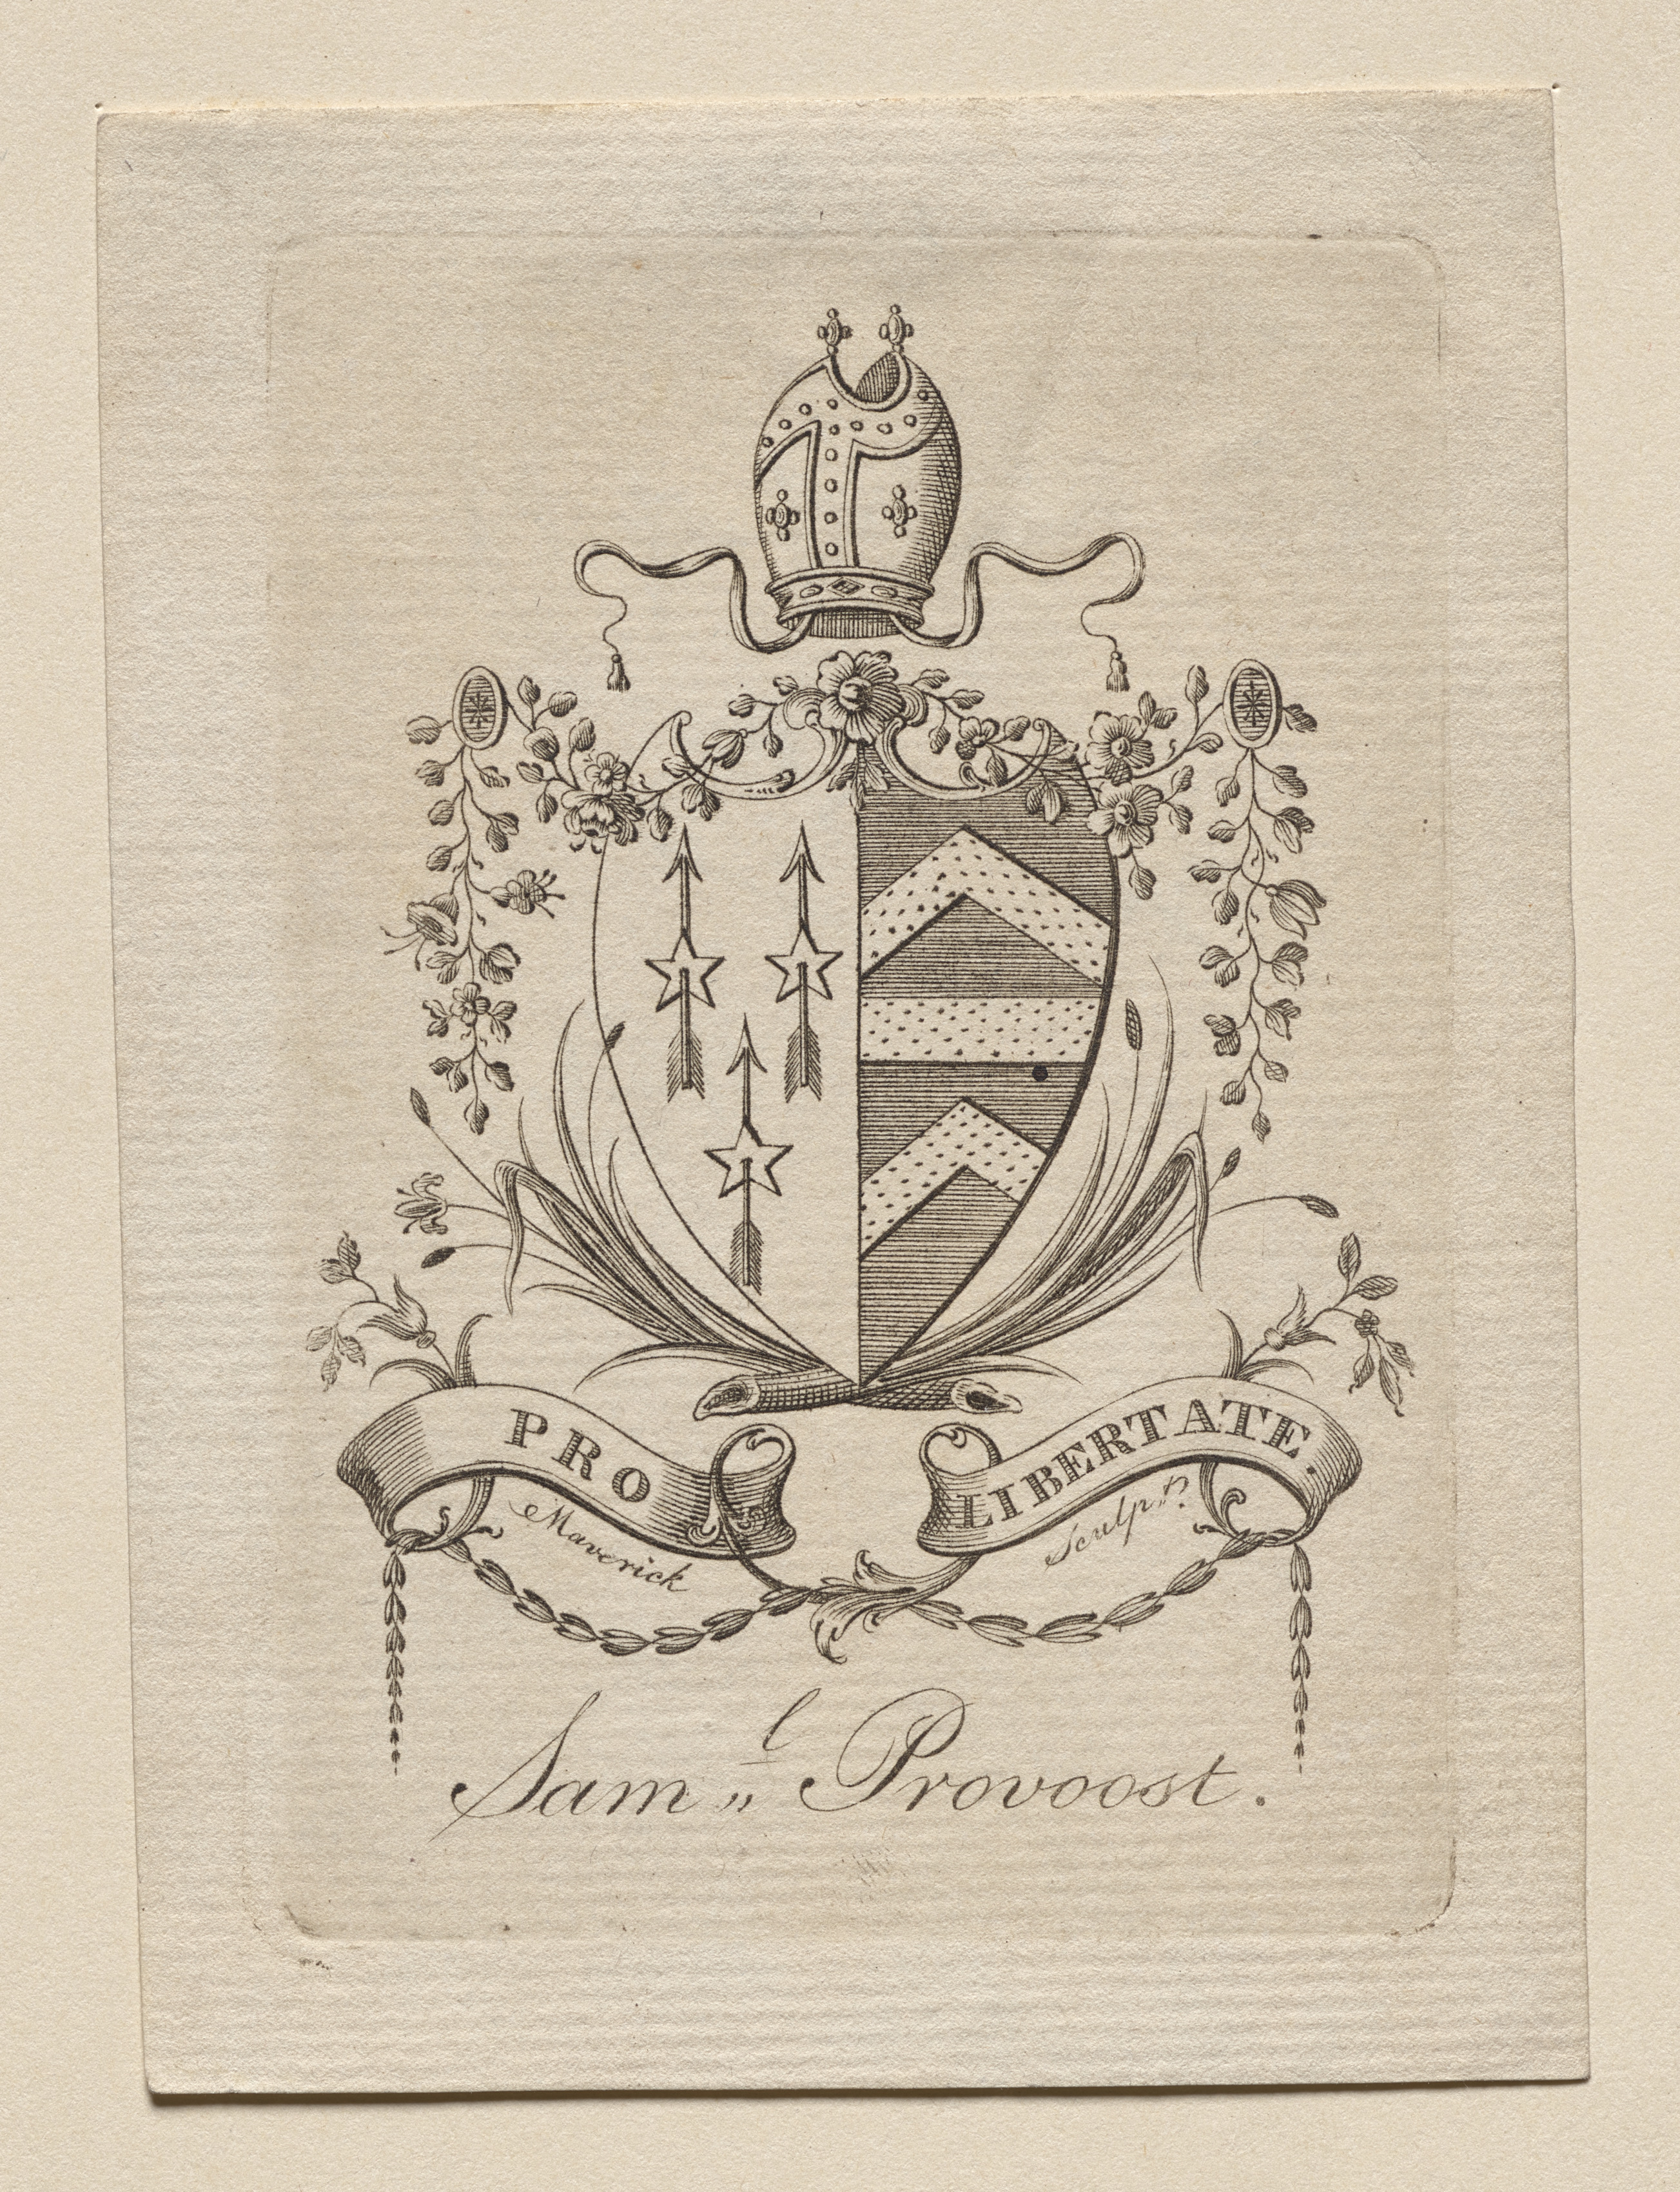 Bookplate:  Coat of Arms with Sam'l Provoost inscribed below